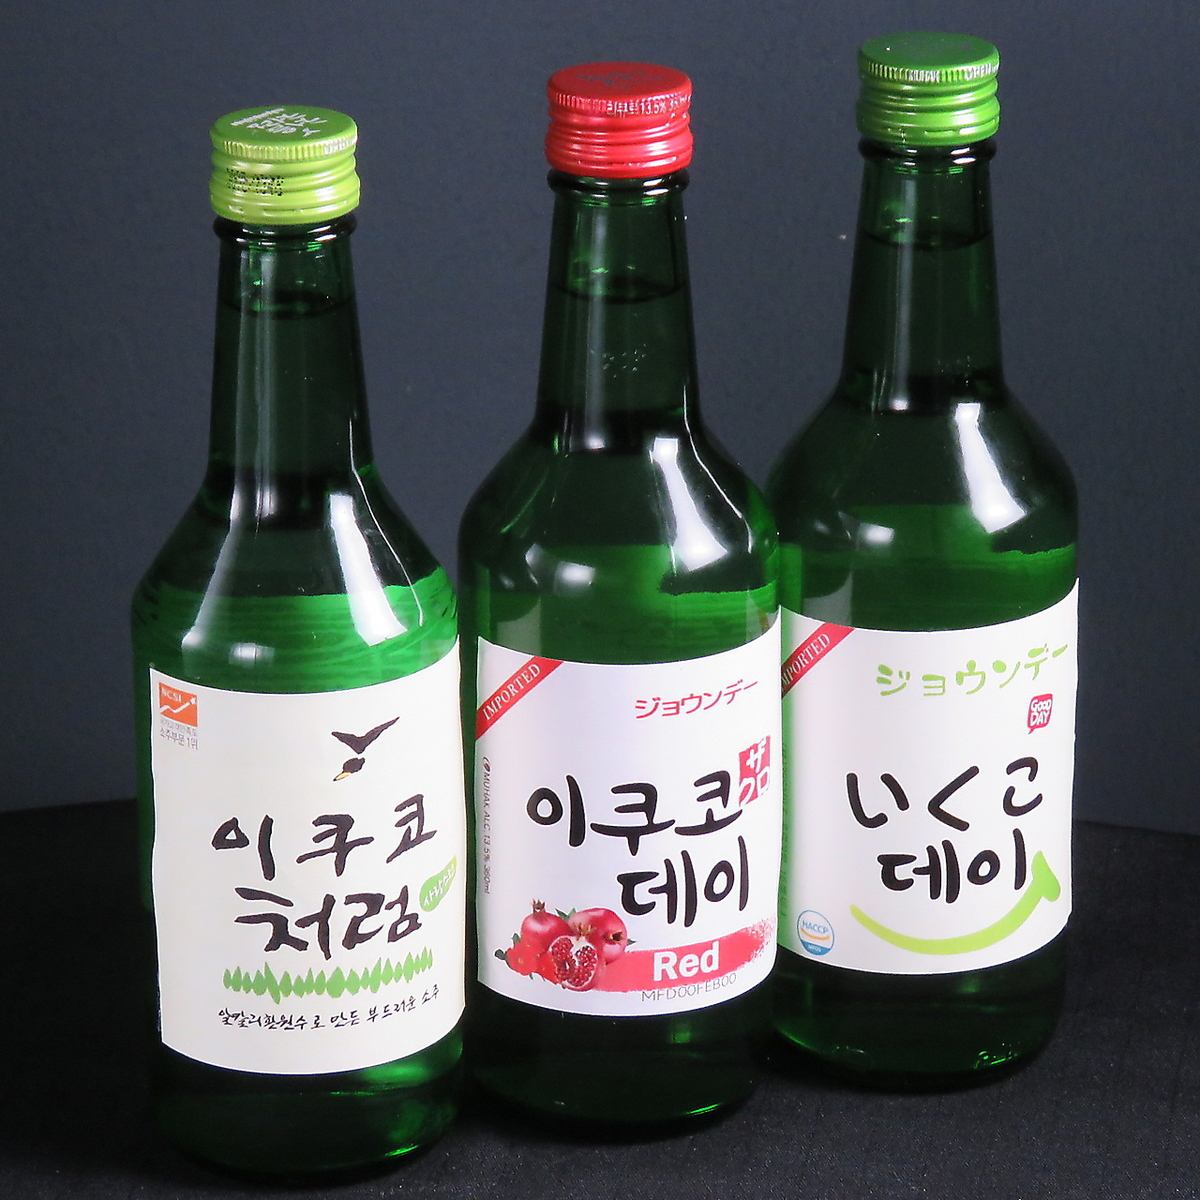 "Soju with your name" will be presented as a birthday surprise with advance reservation ♪